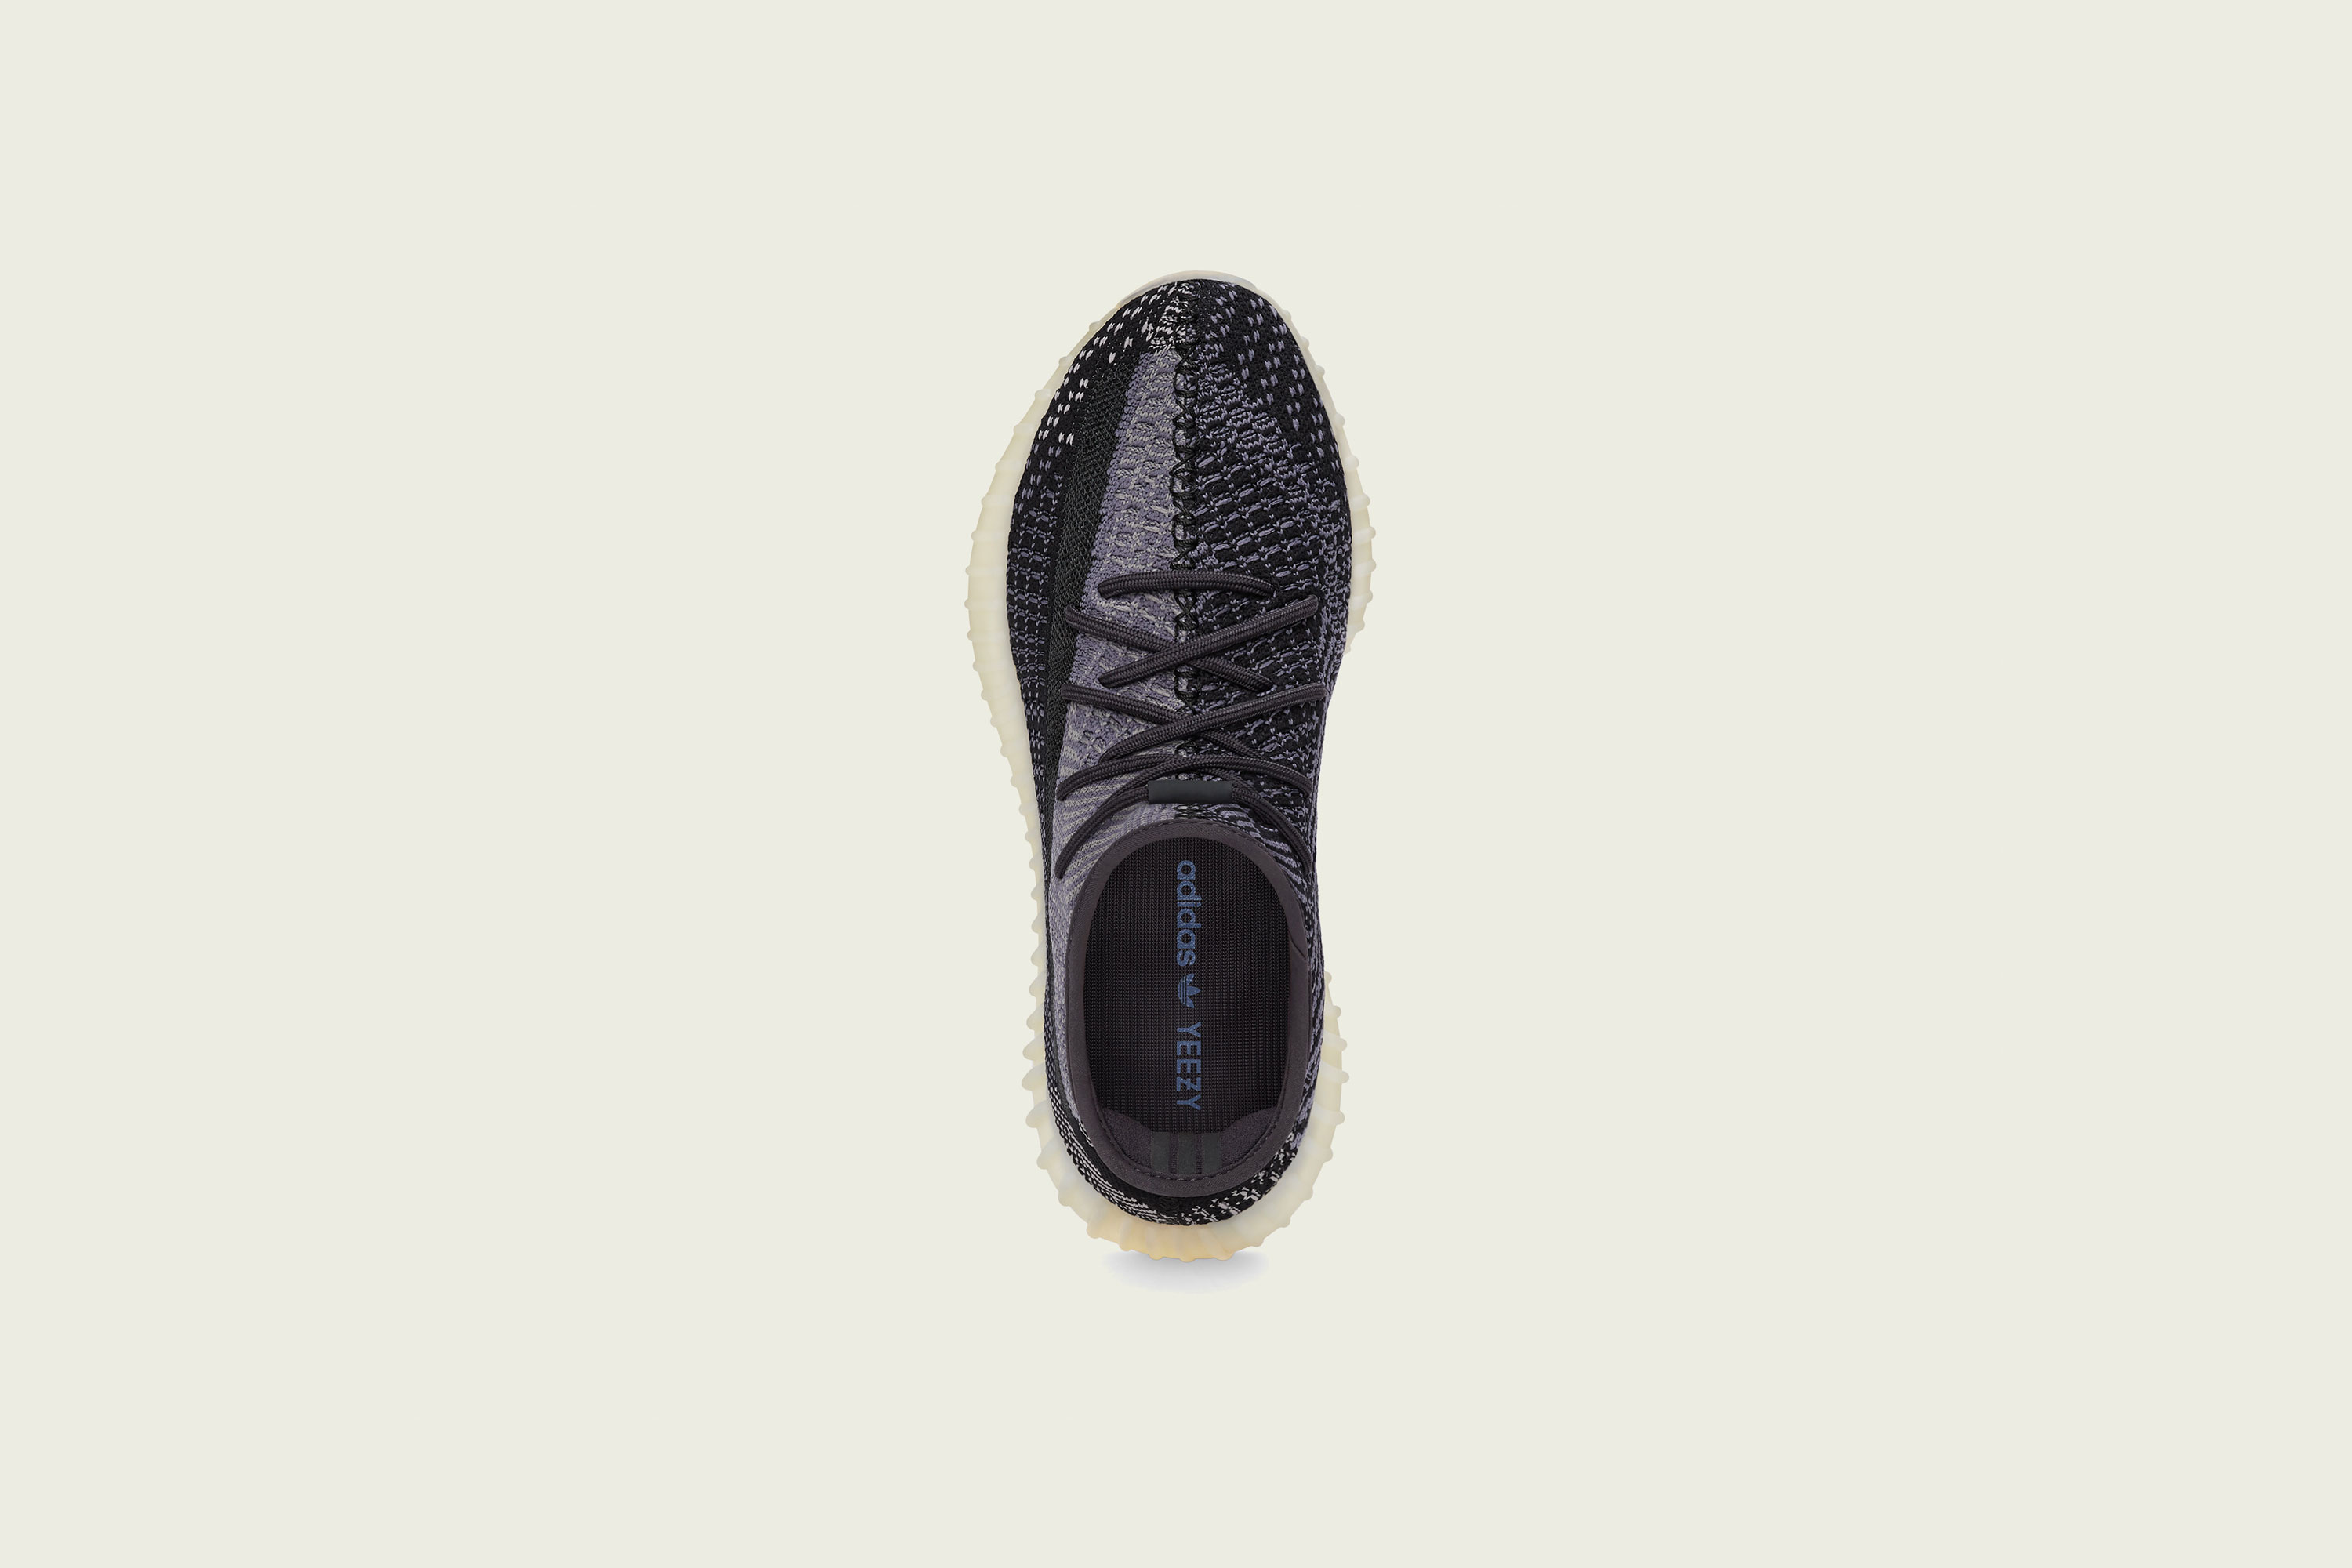 Kridt Socialist blande Yeezy Boost 350v2 - Carbon | Up There